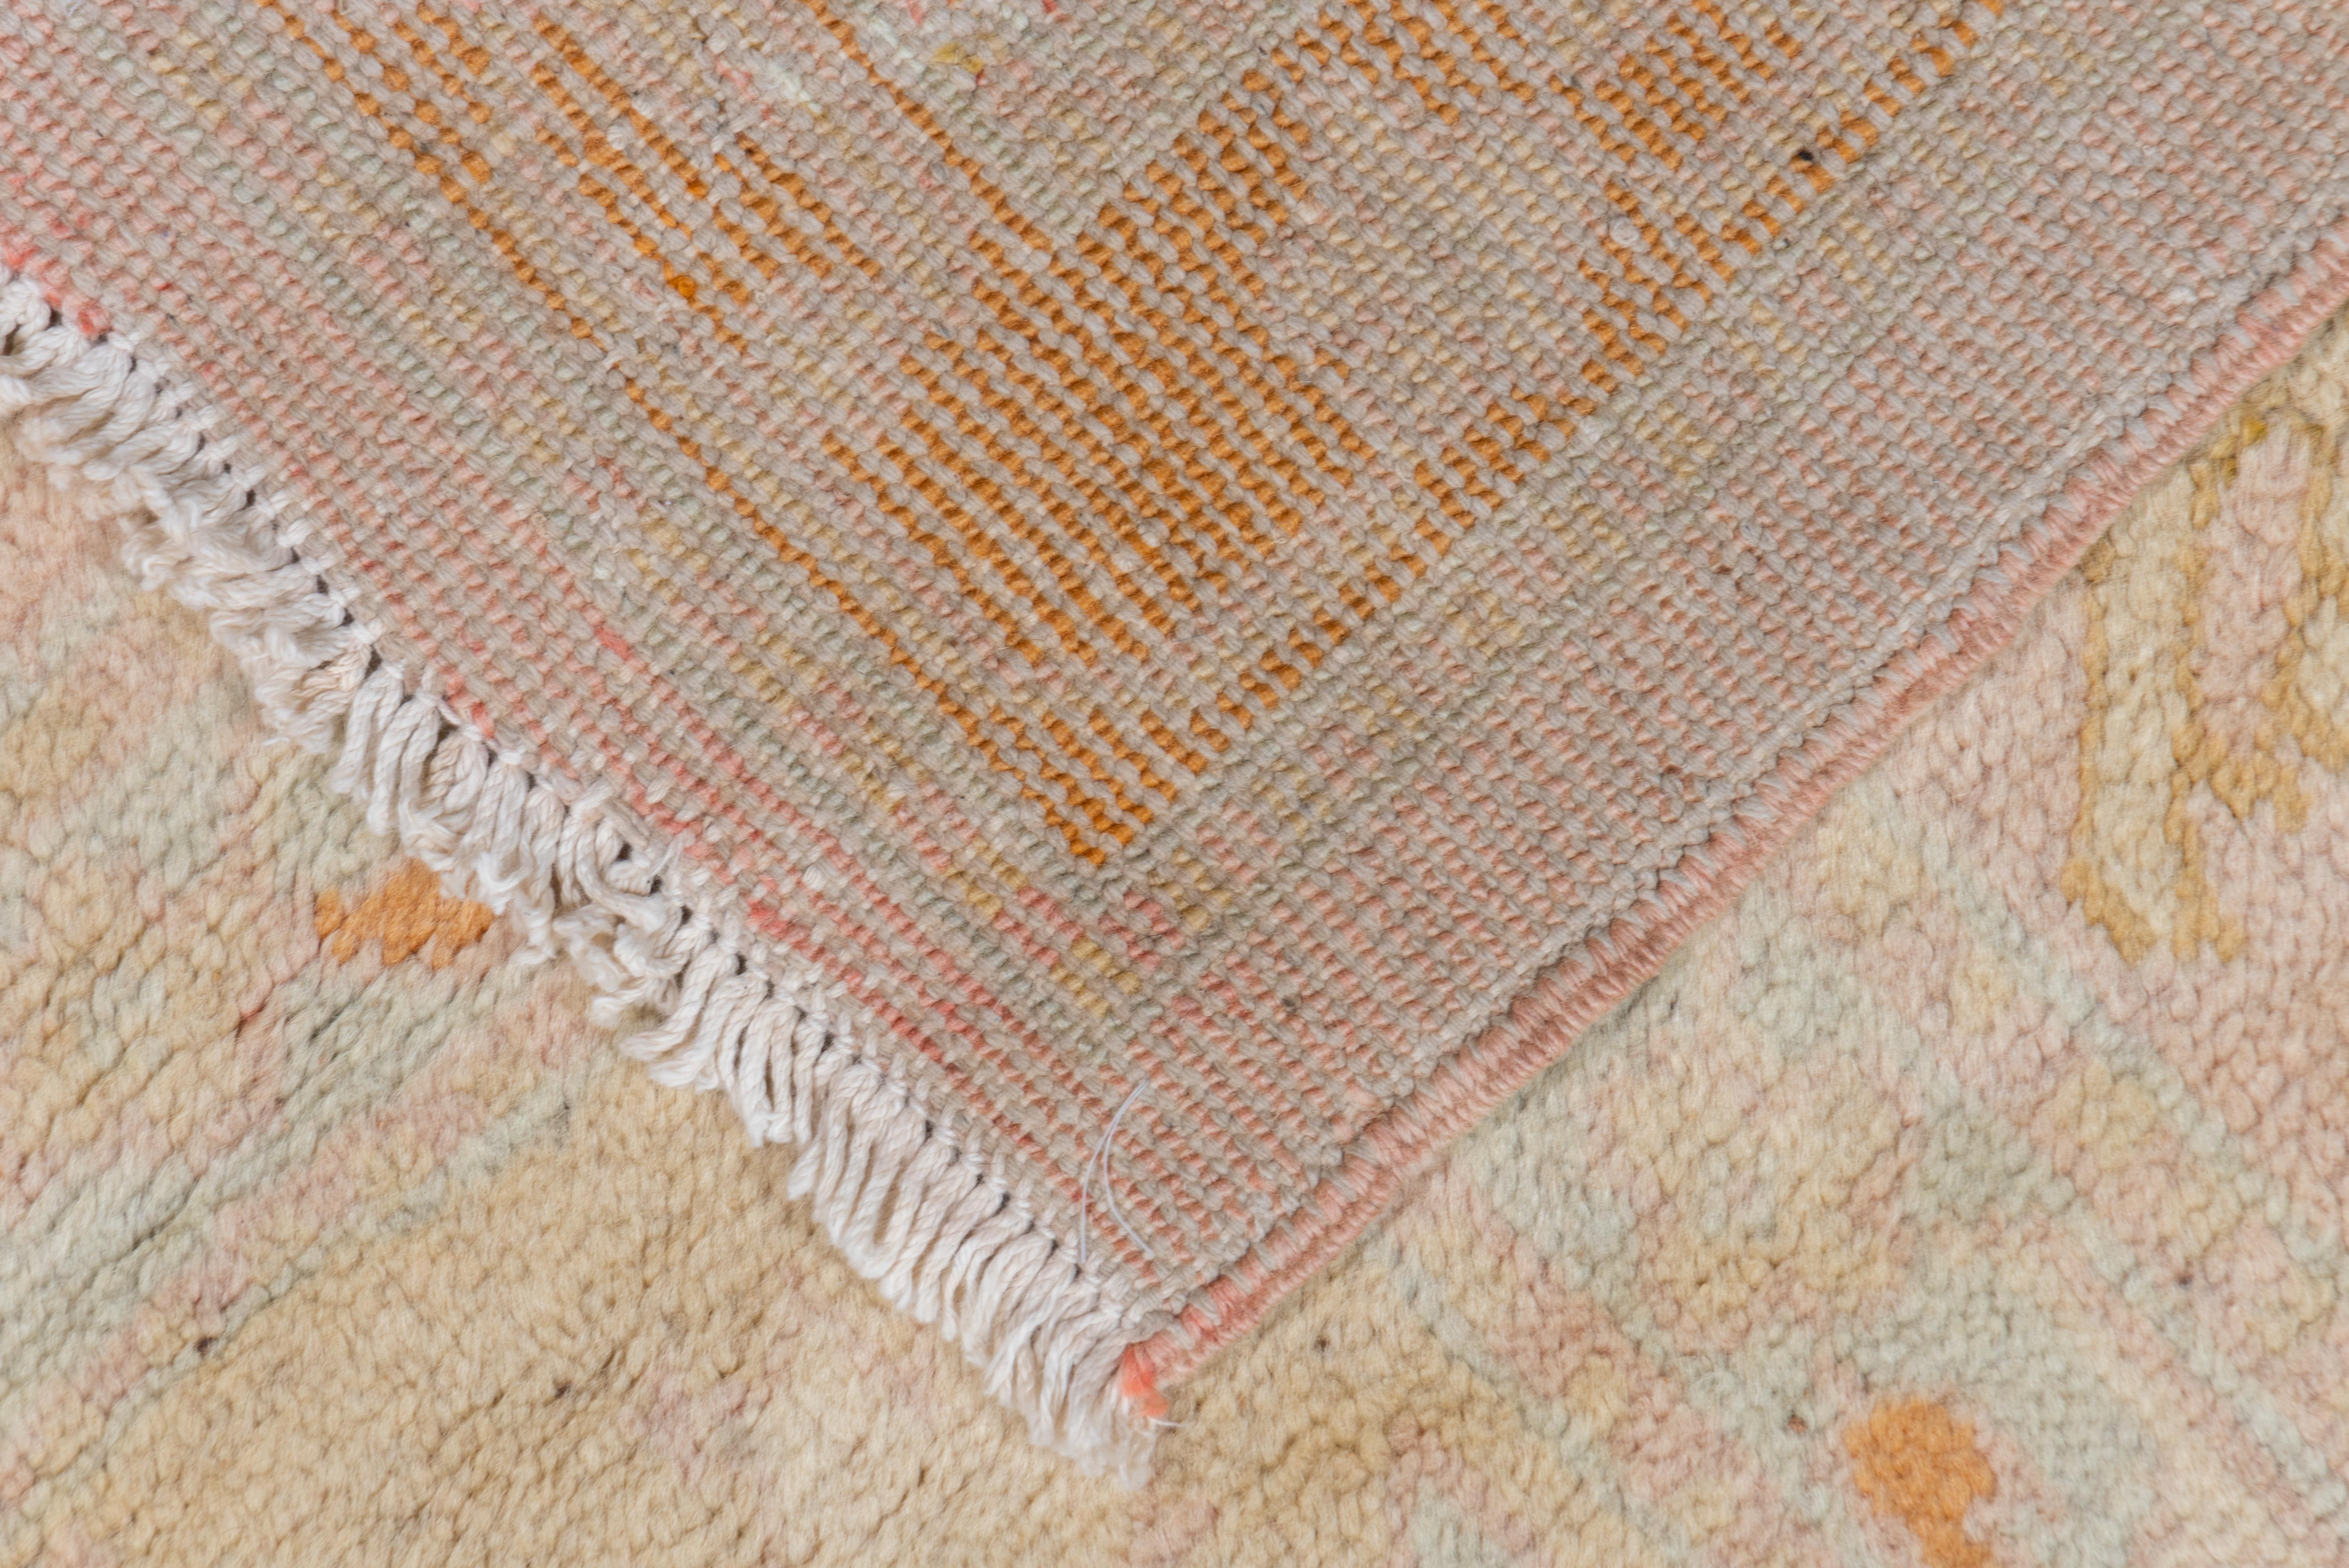 Antique Pink Turkish Oushak Carpet with Orange & Yellow Accents, circa 1920s For Sale 1